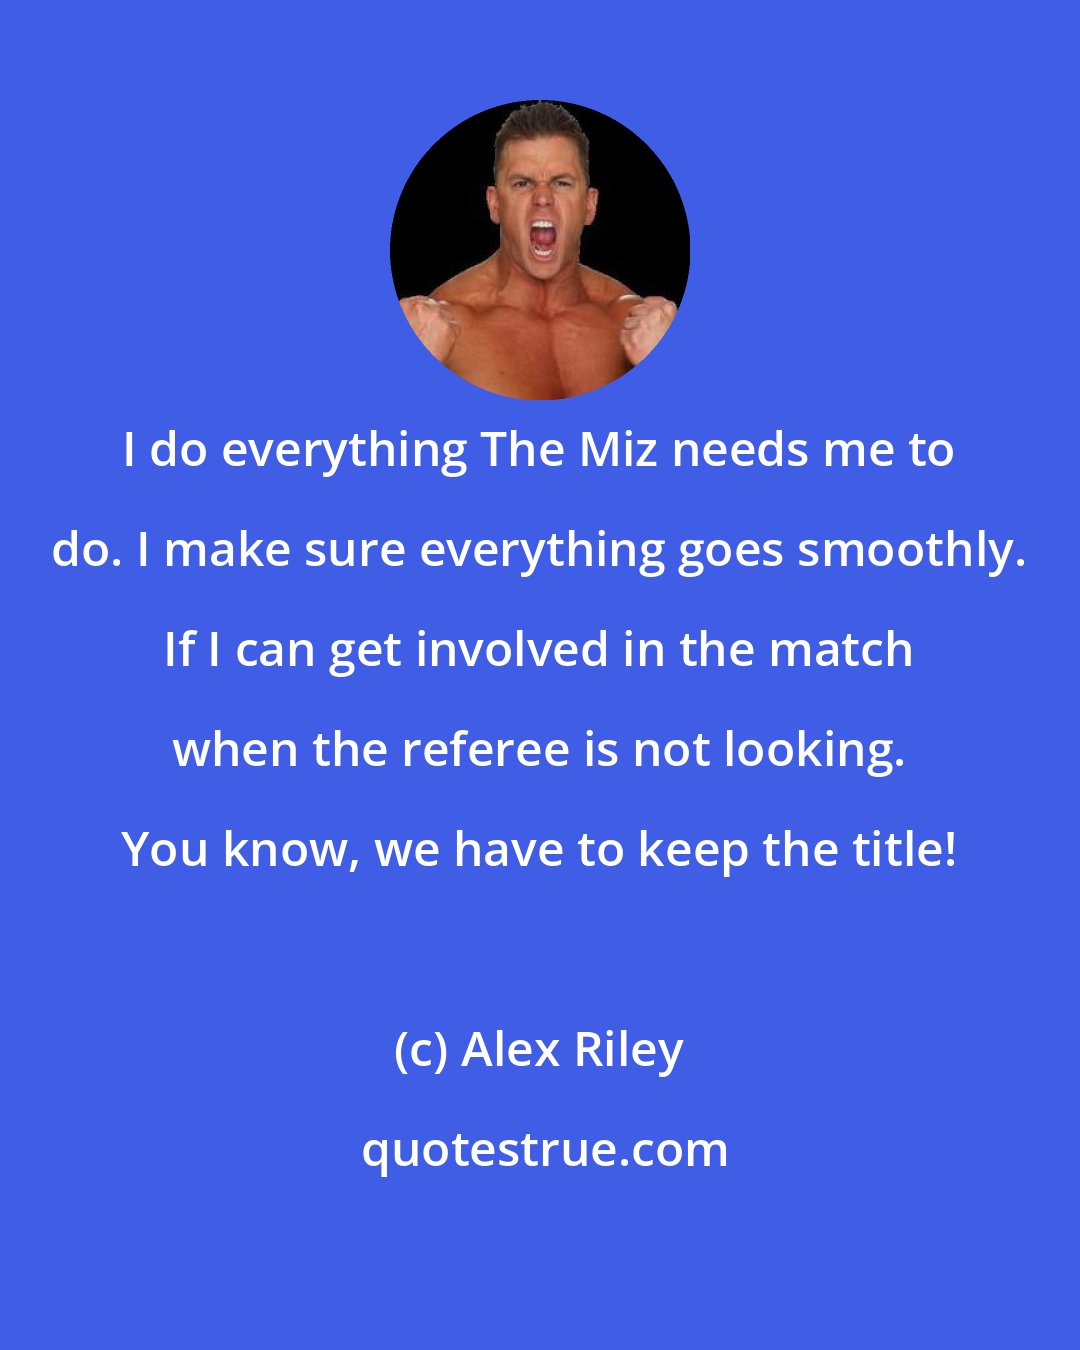 Alex Riley: I do everything The Miz needs me to do. I make sure everything goes smoothly. If I can get involved in the match when the referee is not looking. You know, we have to keep the title!